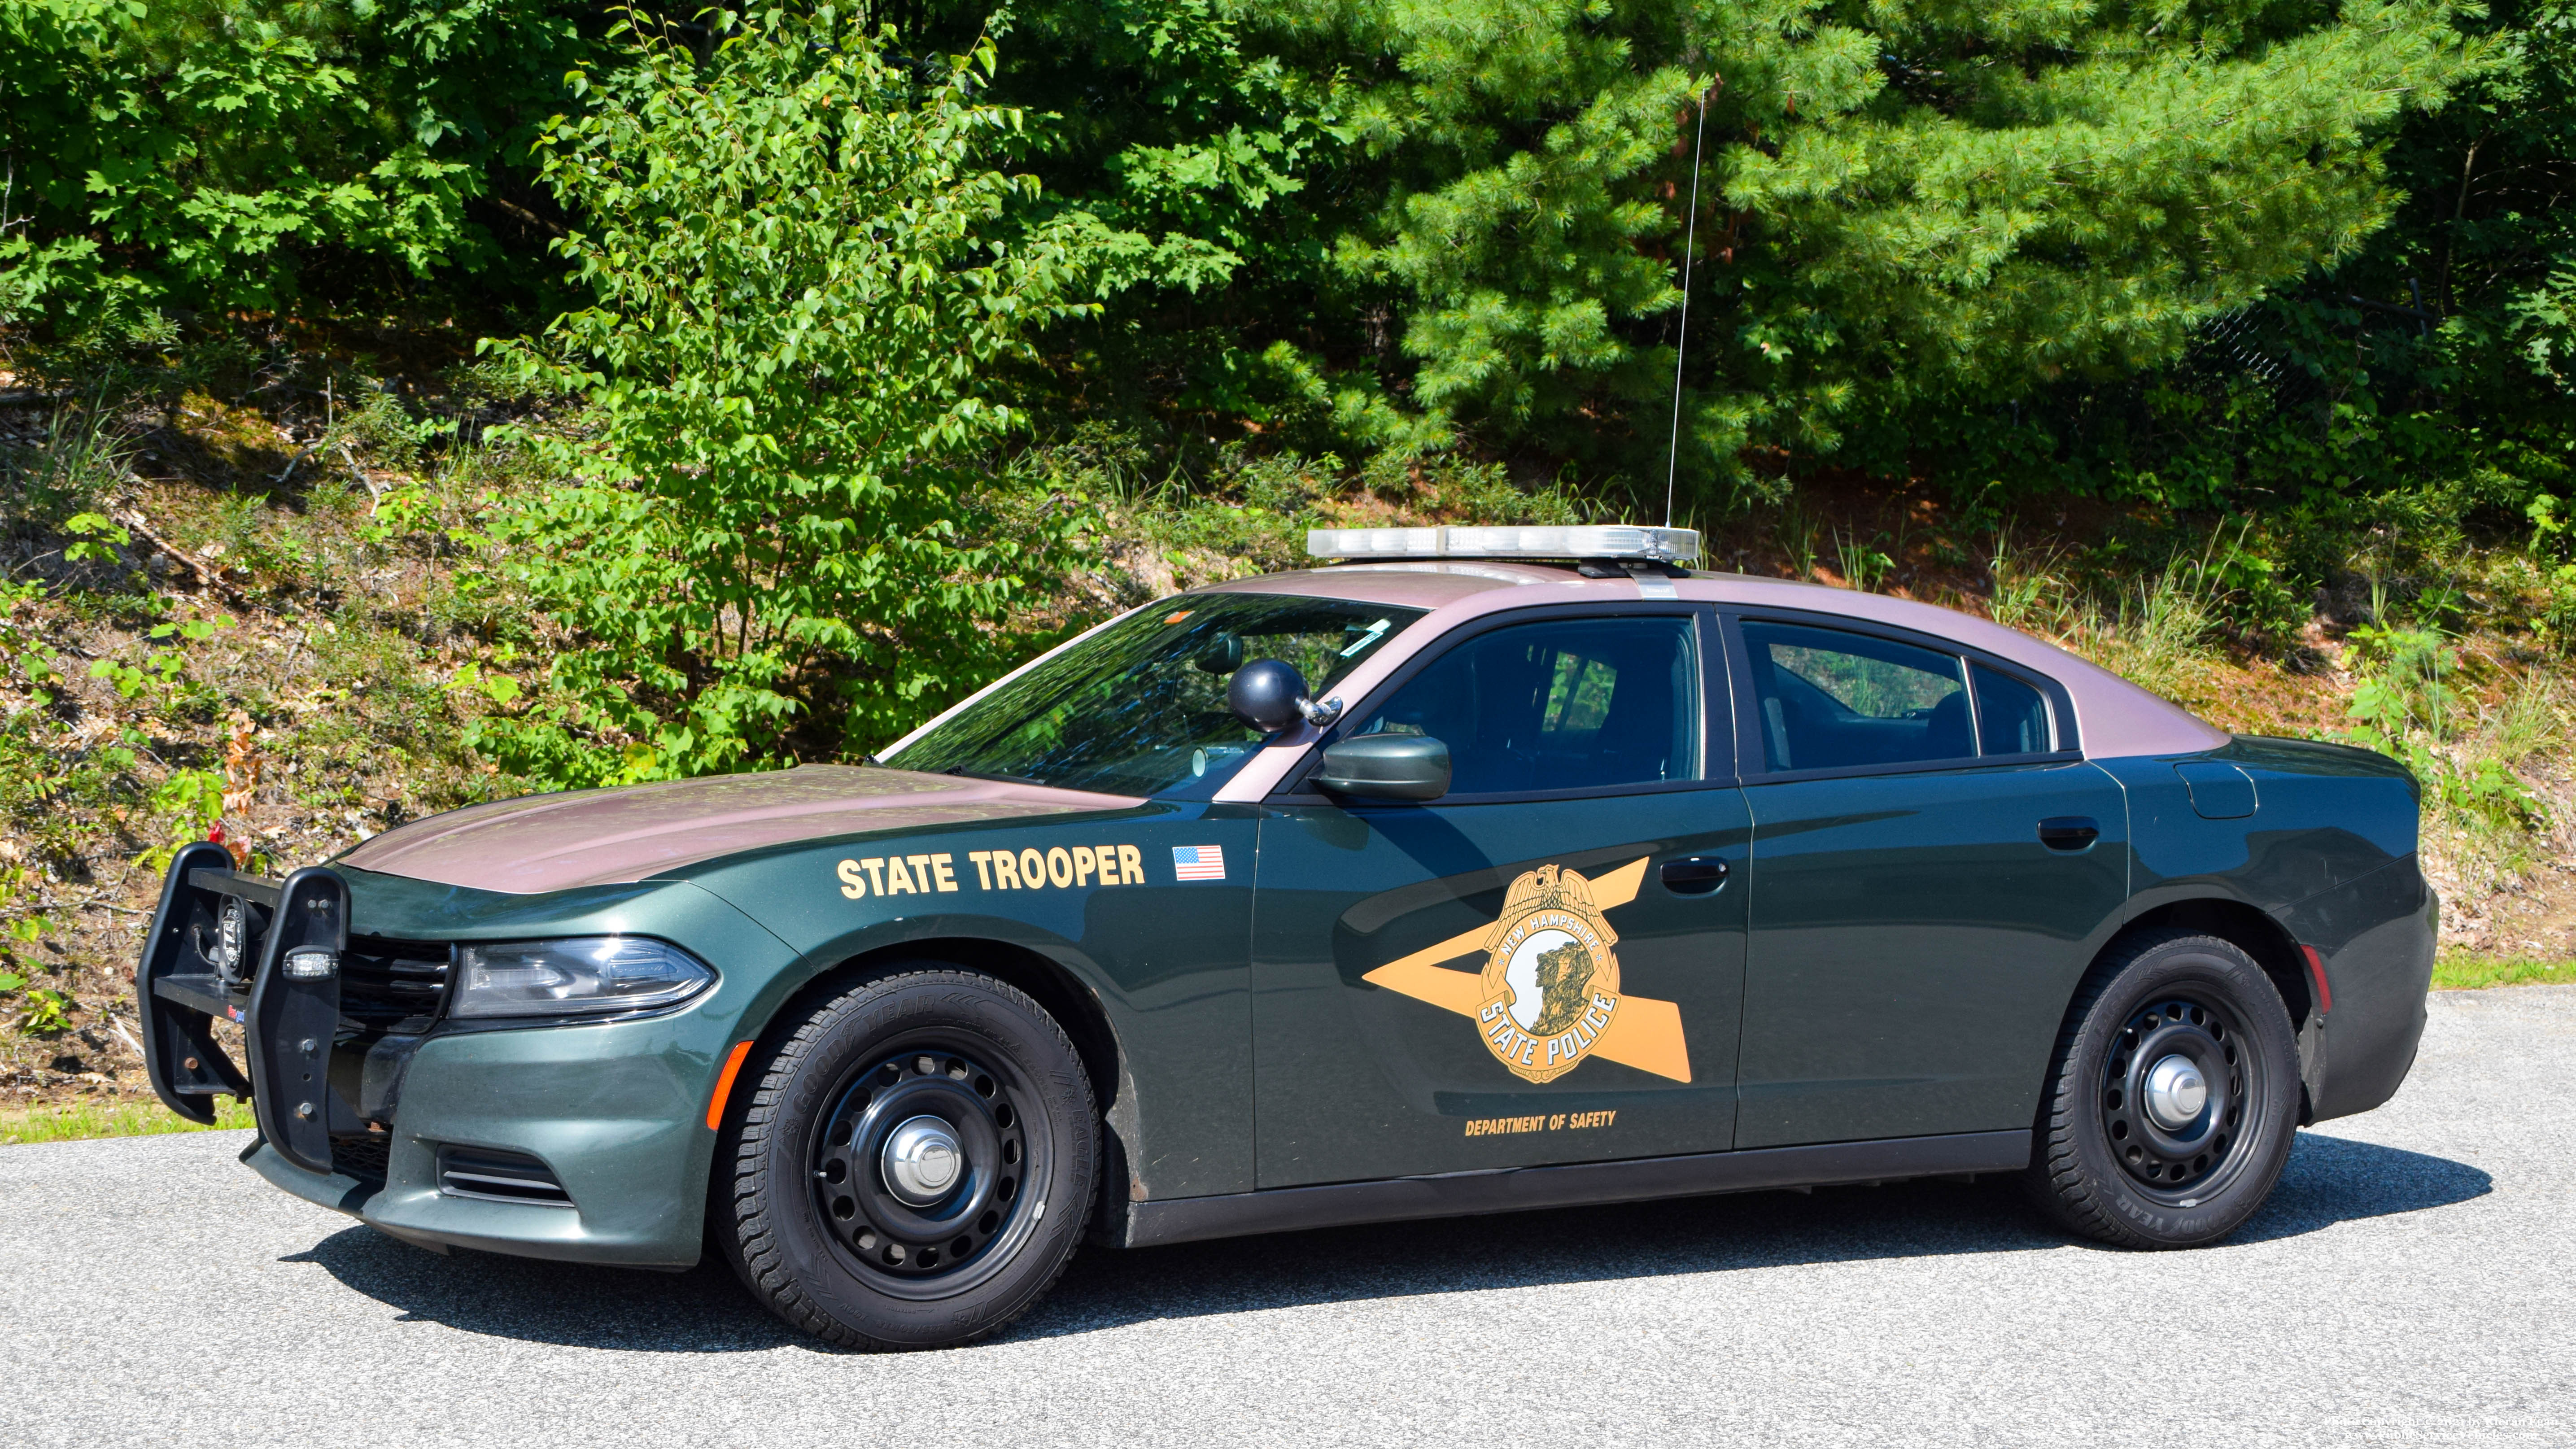 A photo  of New Hampshire State Police
            Cruiser 420, a 2015-2019 Dodge Charger             taken by Kieran Egan